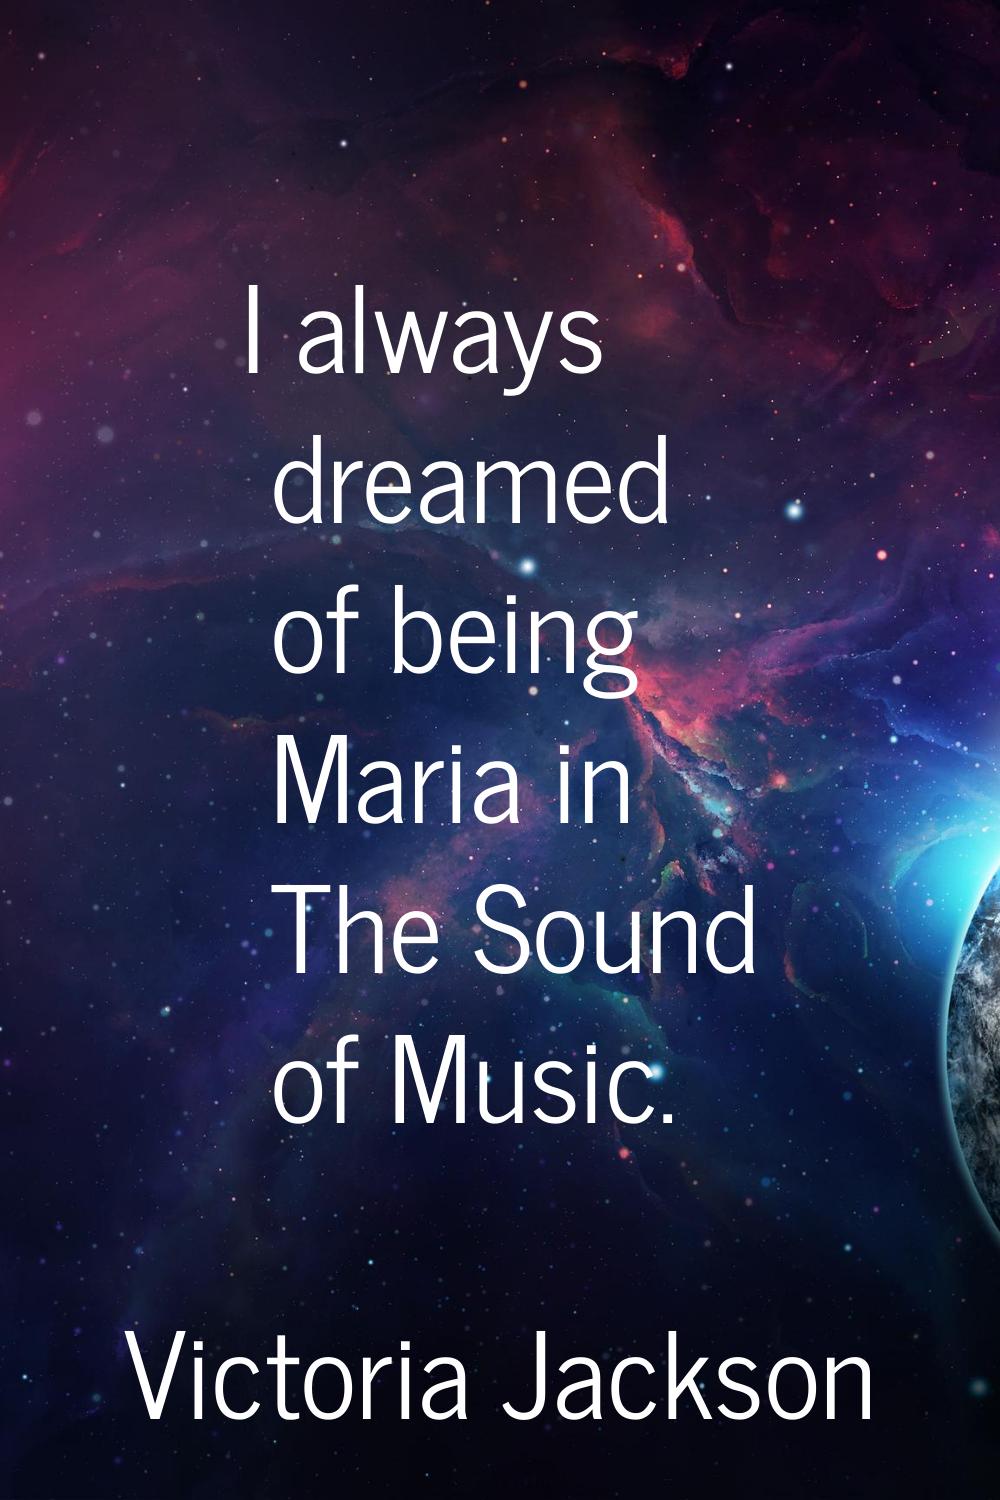 I always dreamed of being Maria in The Sound of Music.